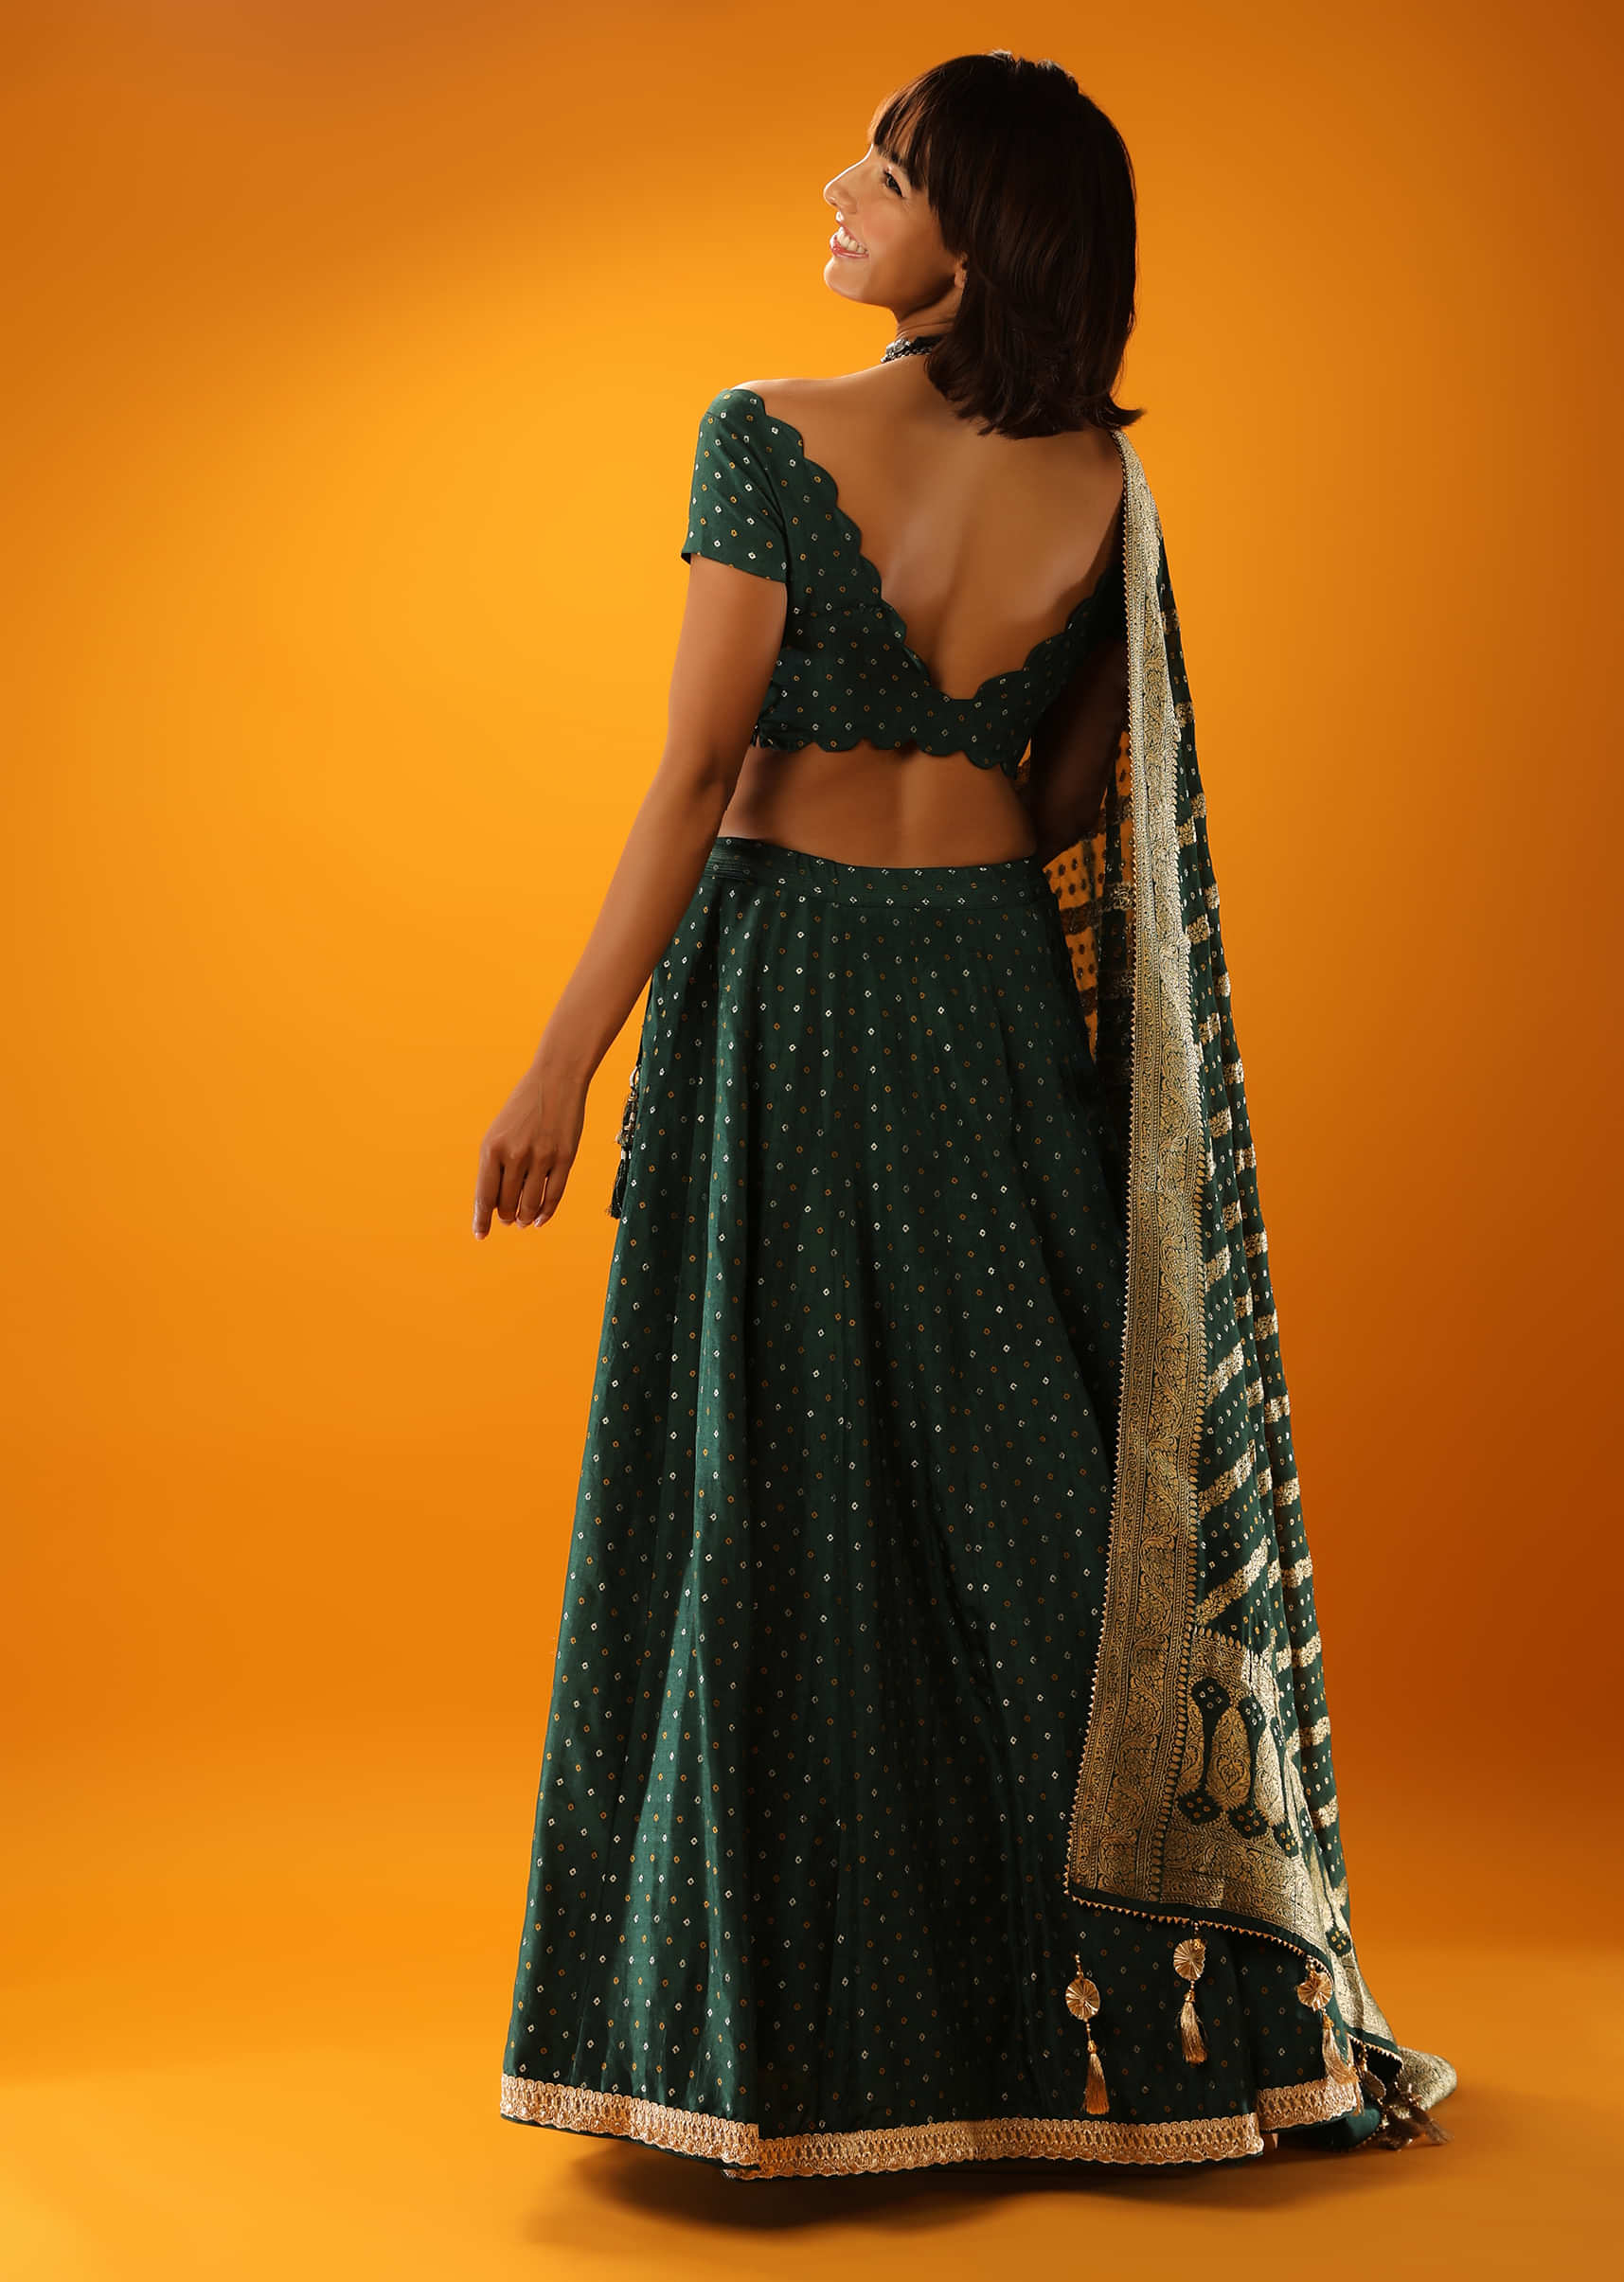 Alpine Green Lehenga In Brocade Silk With Woven Bandhani Design And Unstitched Blouse 